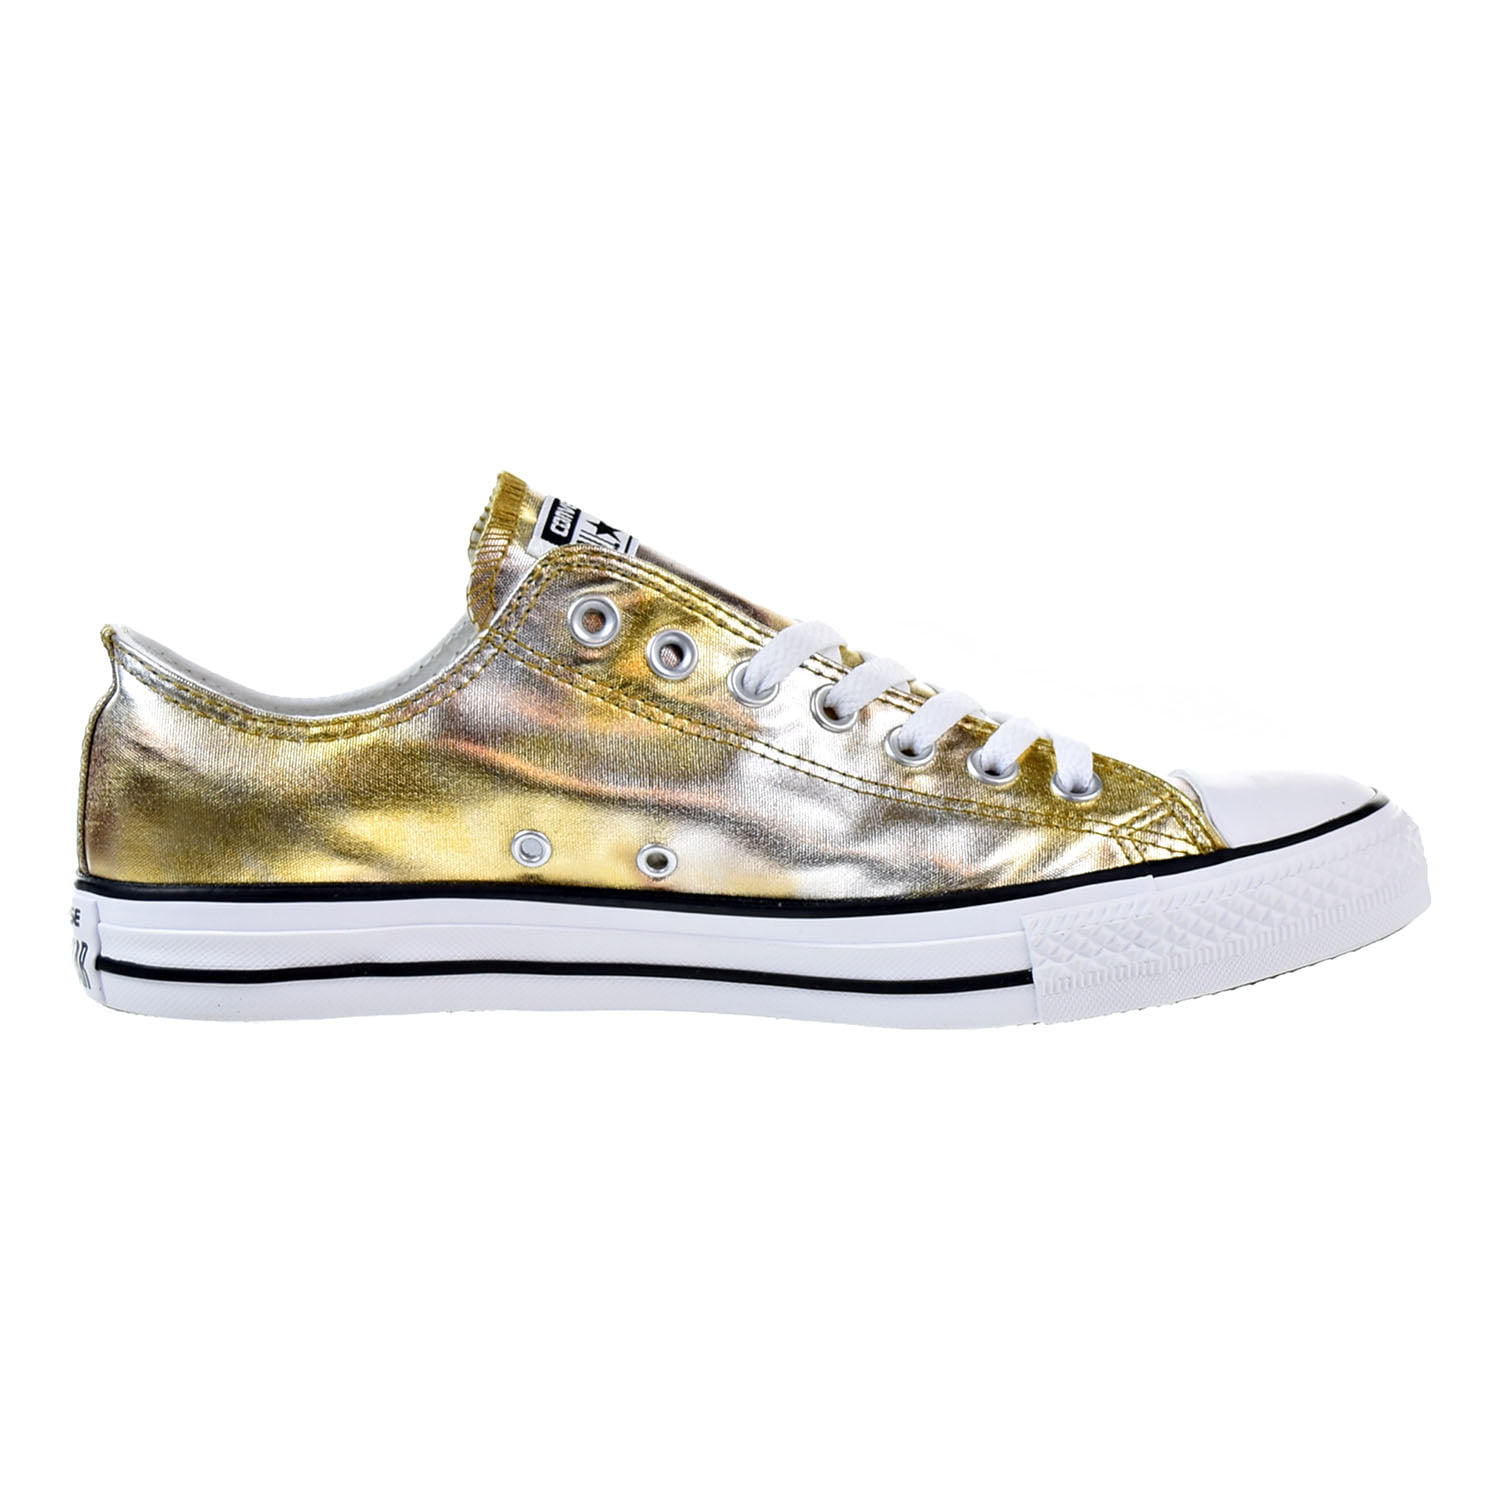 Converse Chuck All Star OX Men's Low Top Shoes Silver/Gold/White 157655f - Walmart.com